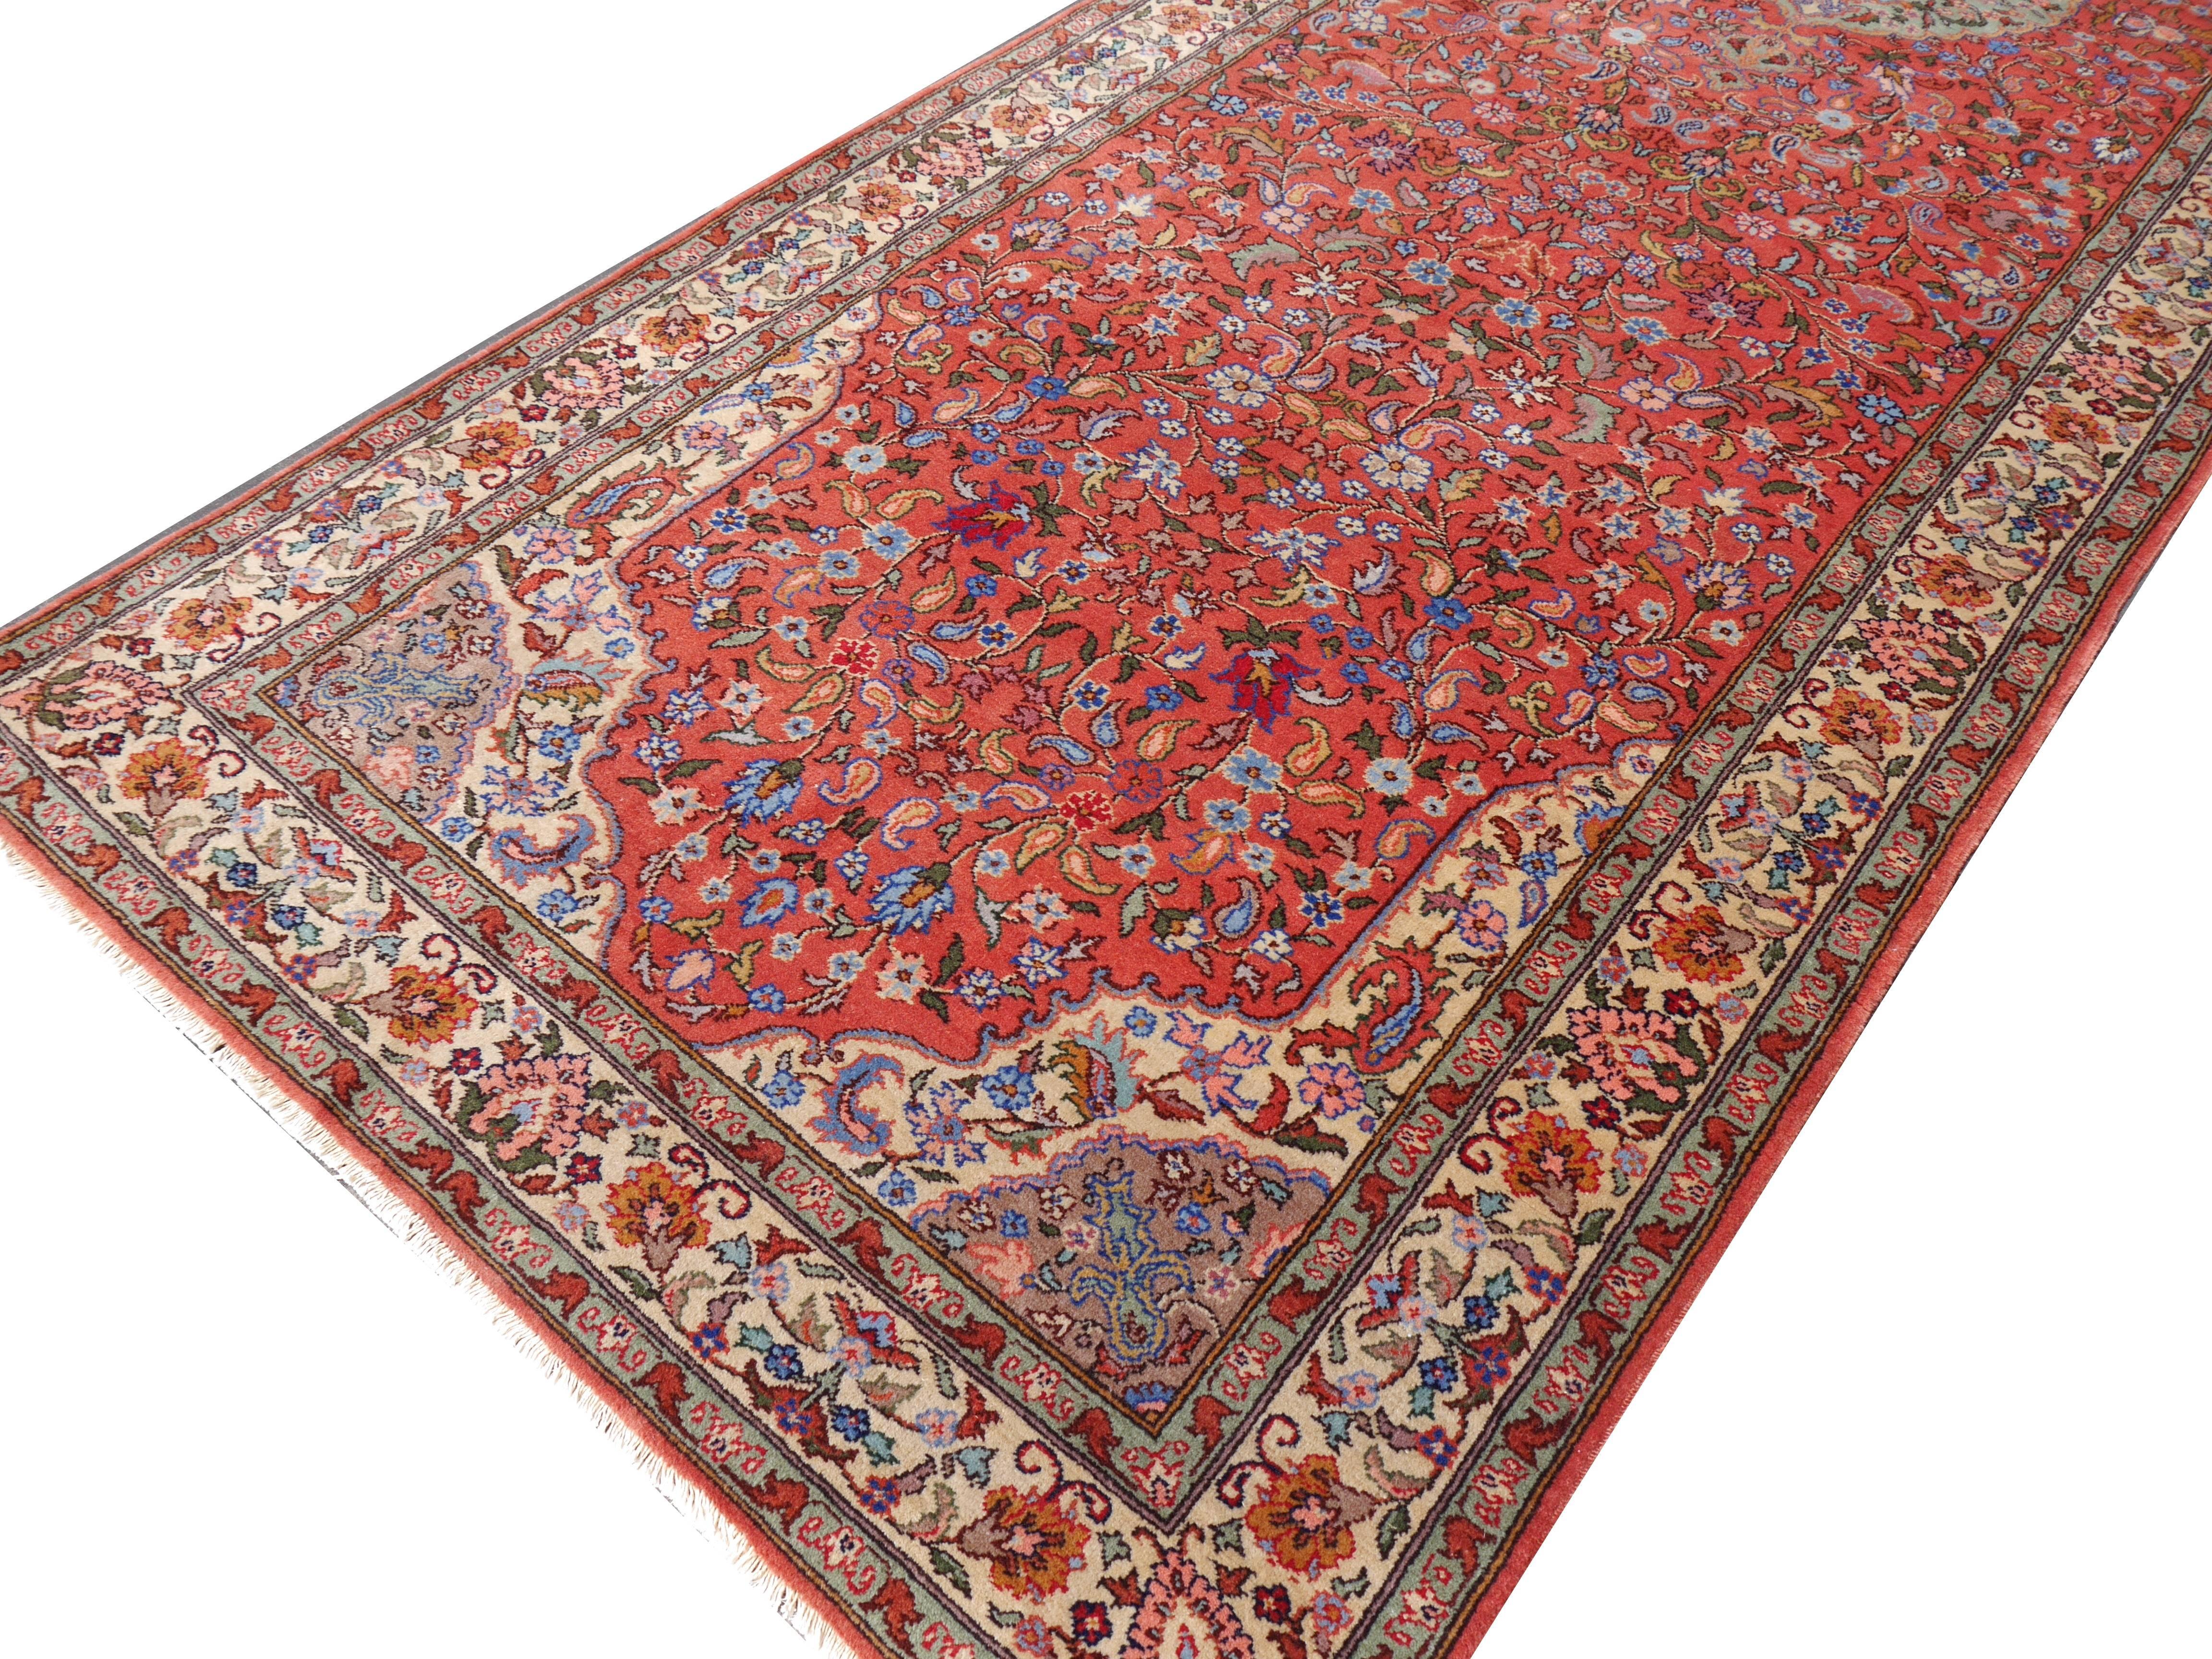 Romanian Tabriz Design Rug 18 x 5 ft large runner Persian traditional style 550 x 153 cm For Sale